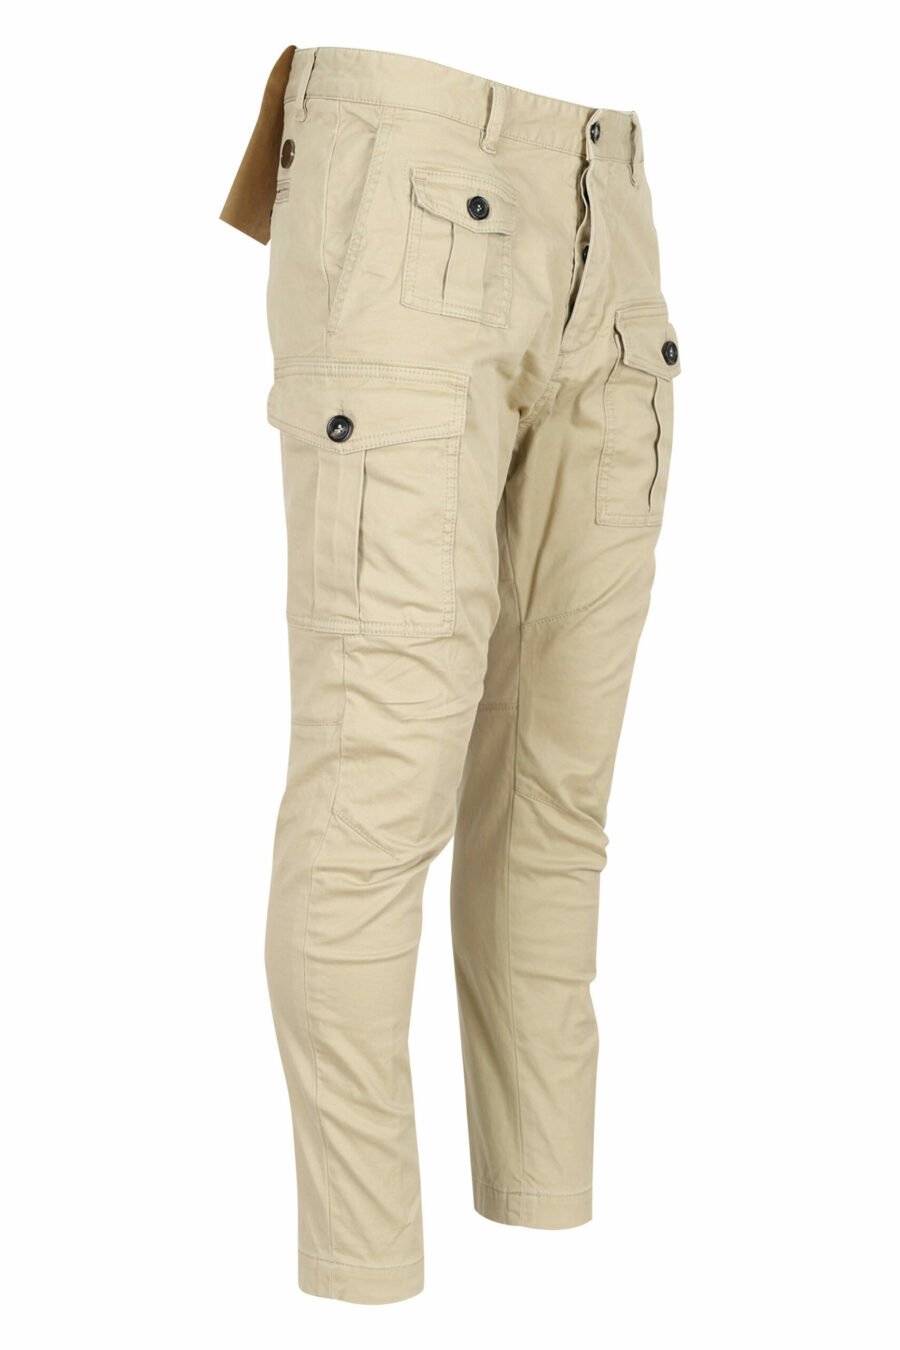 Beige sexy cargo trousers with side pockets - 8052134973615 1 scaled